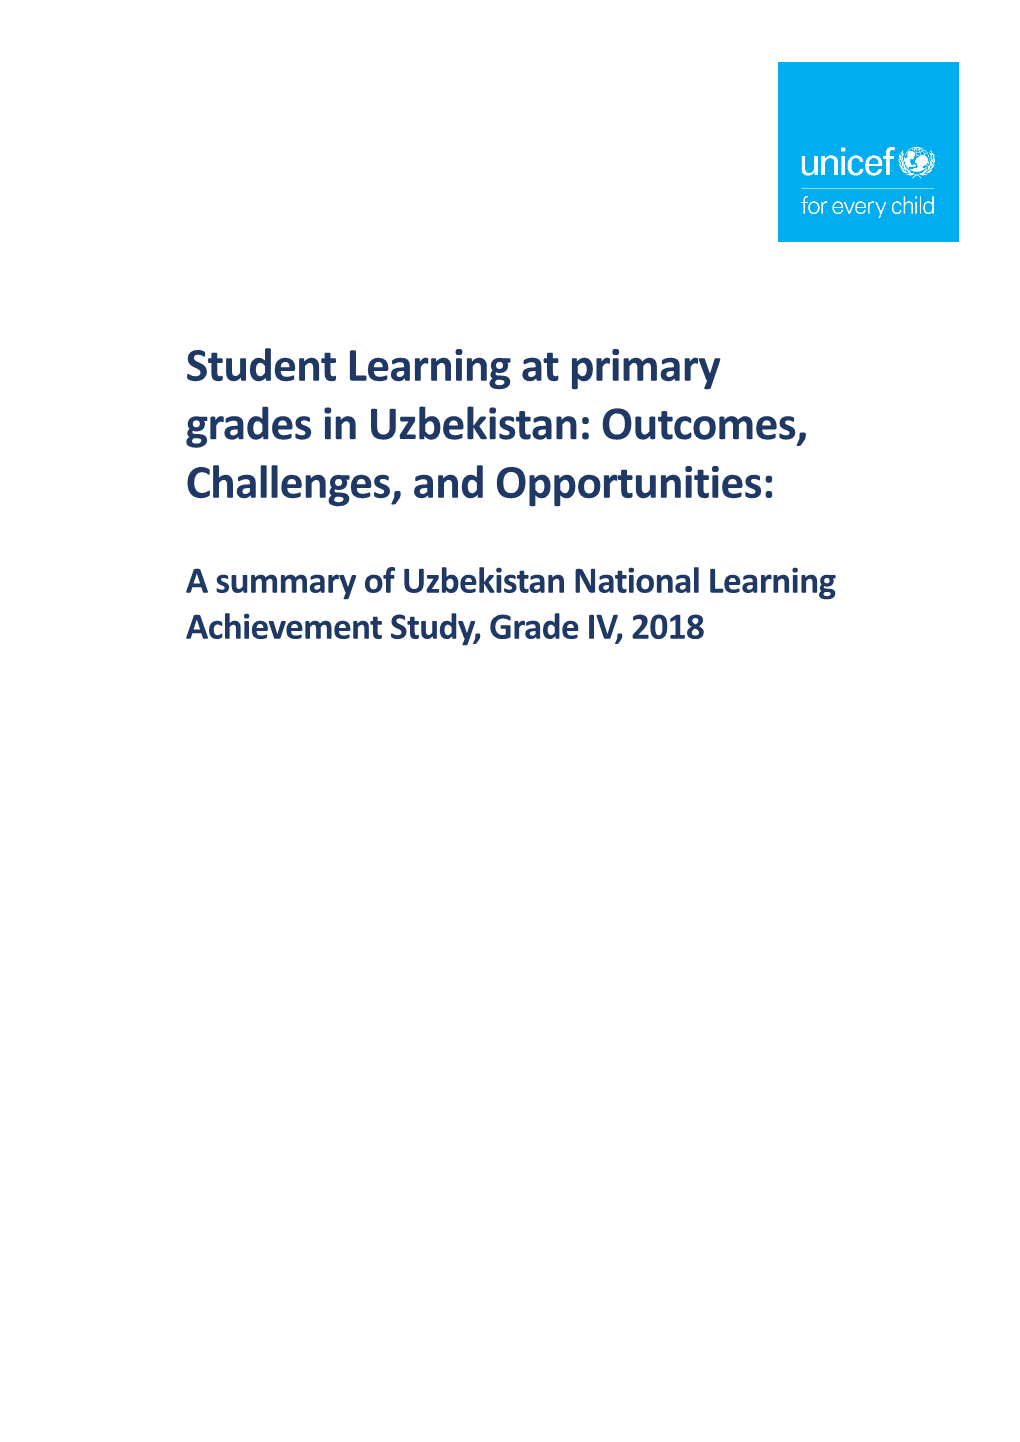 Student Learning at Primary Grades in Uzbekistan: Outcomes, Challenges, and Opportunities